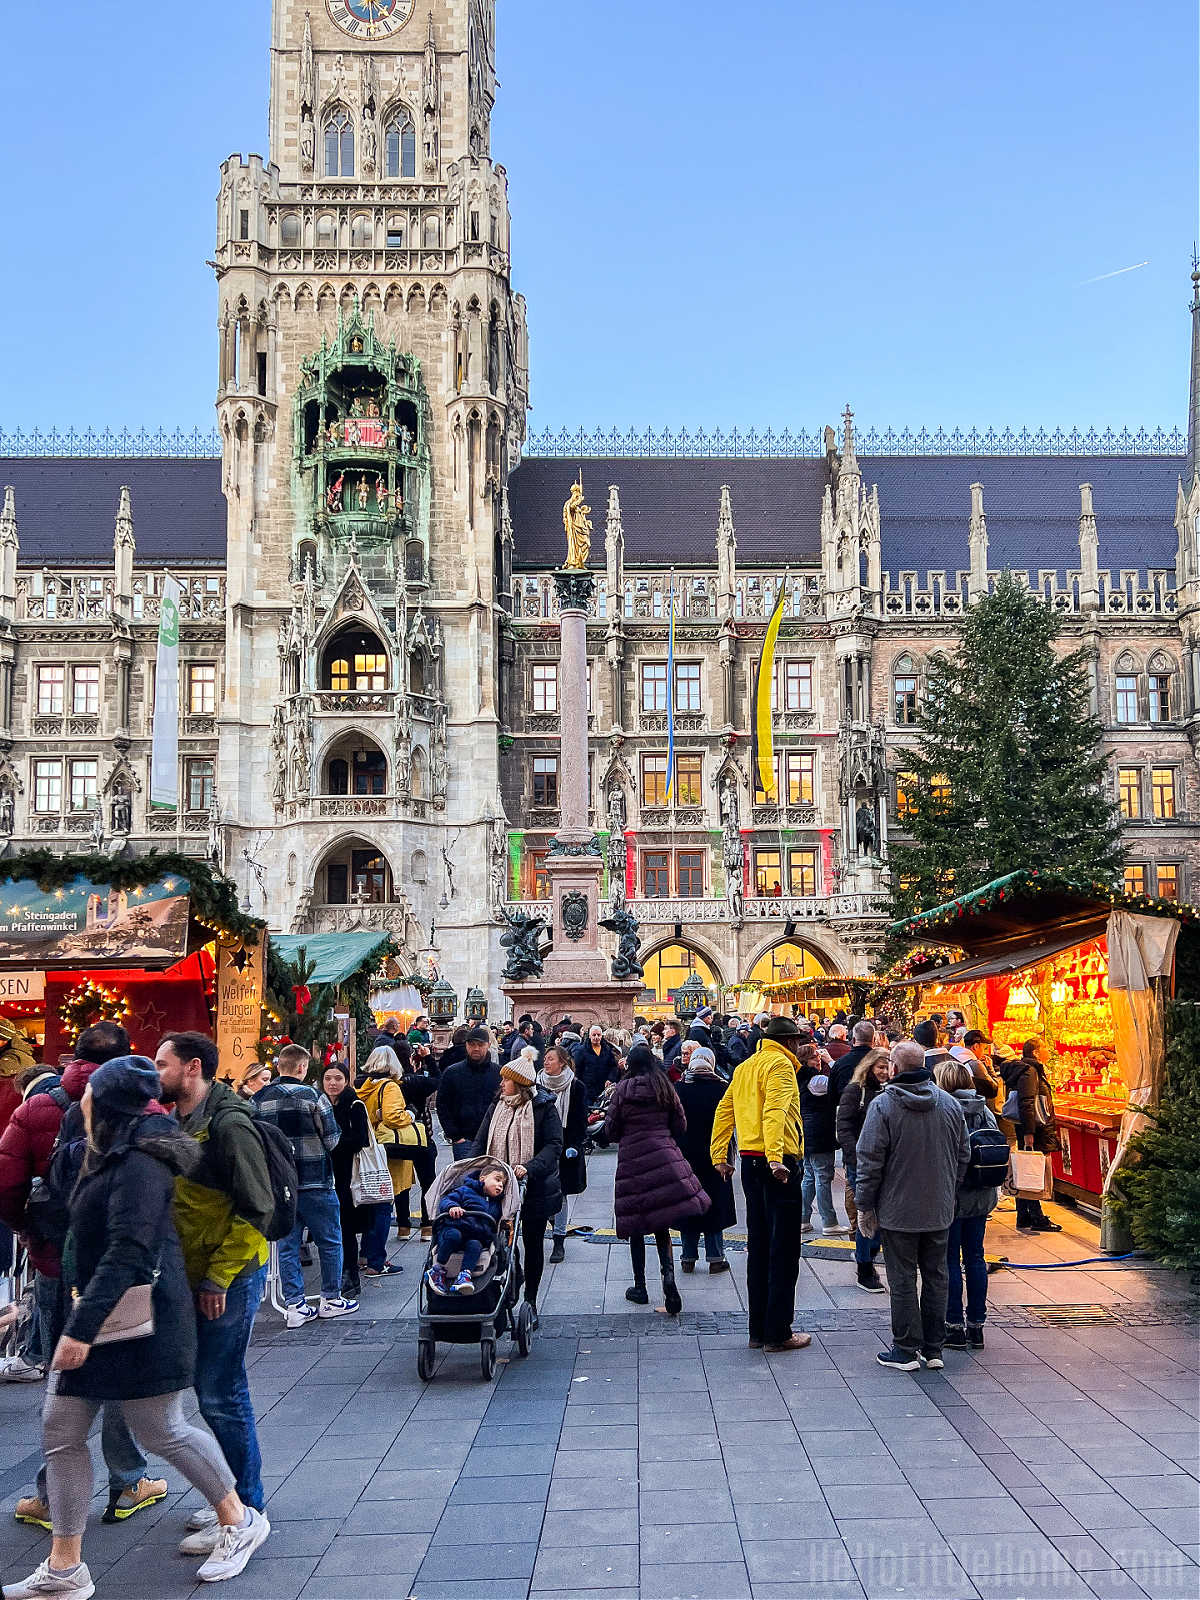 People shopping at stands in the Marienplatz.